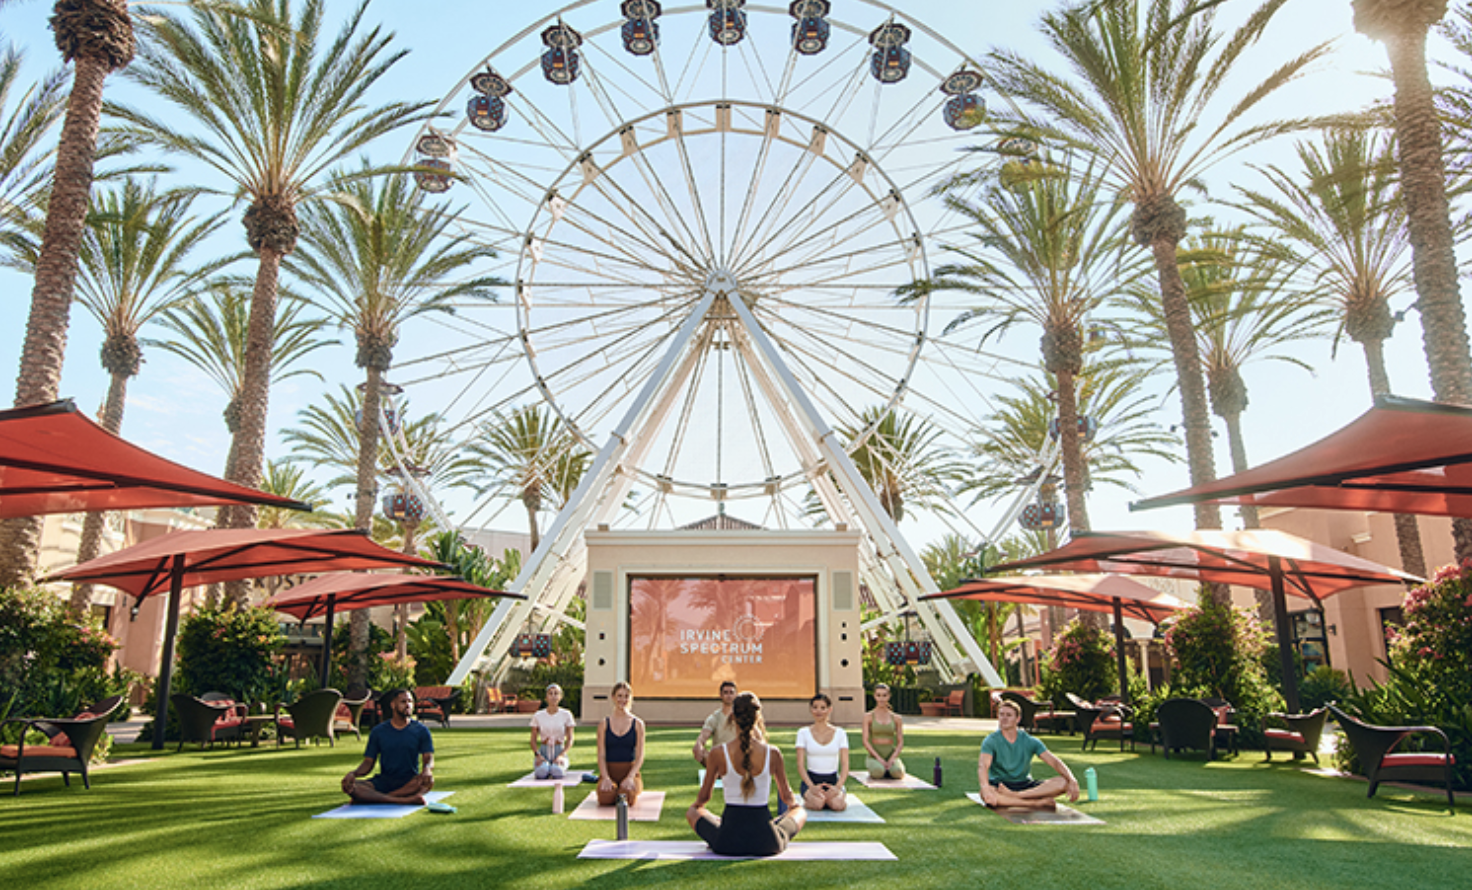 Irvine Spectrum is at the center of summertime